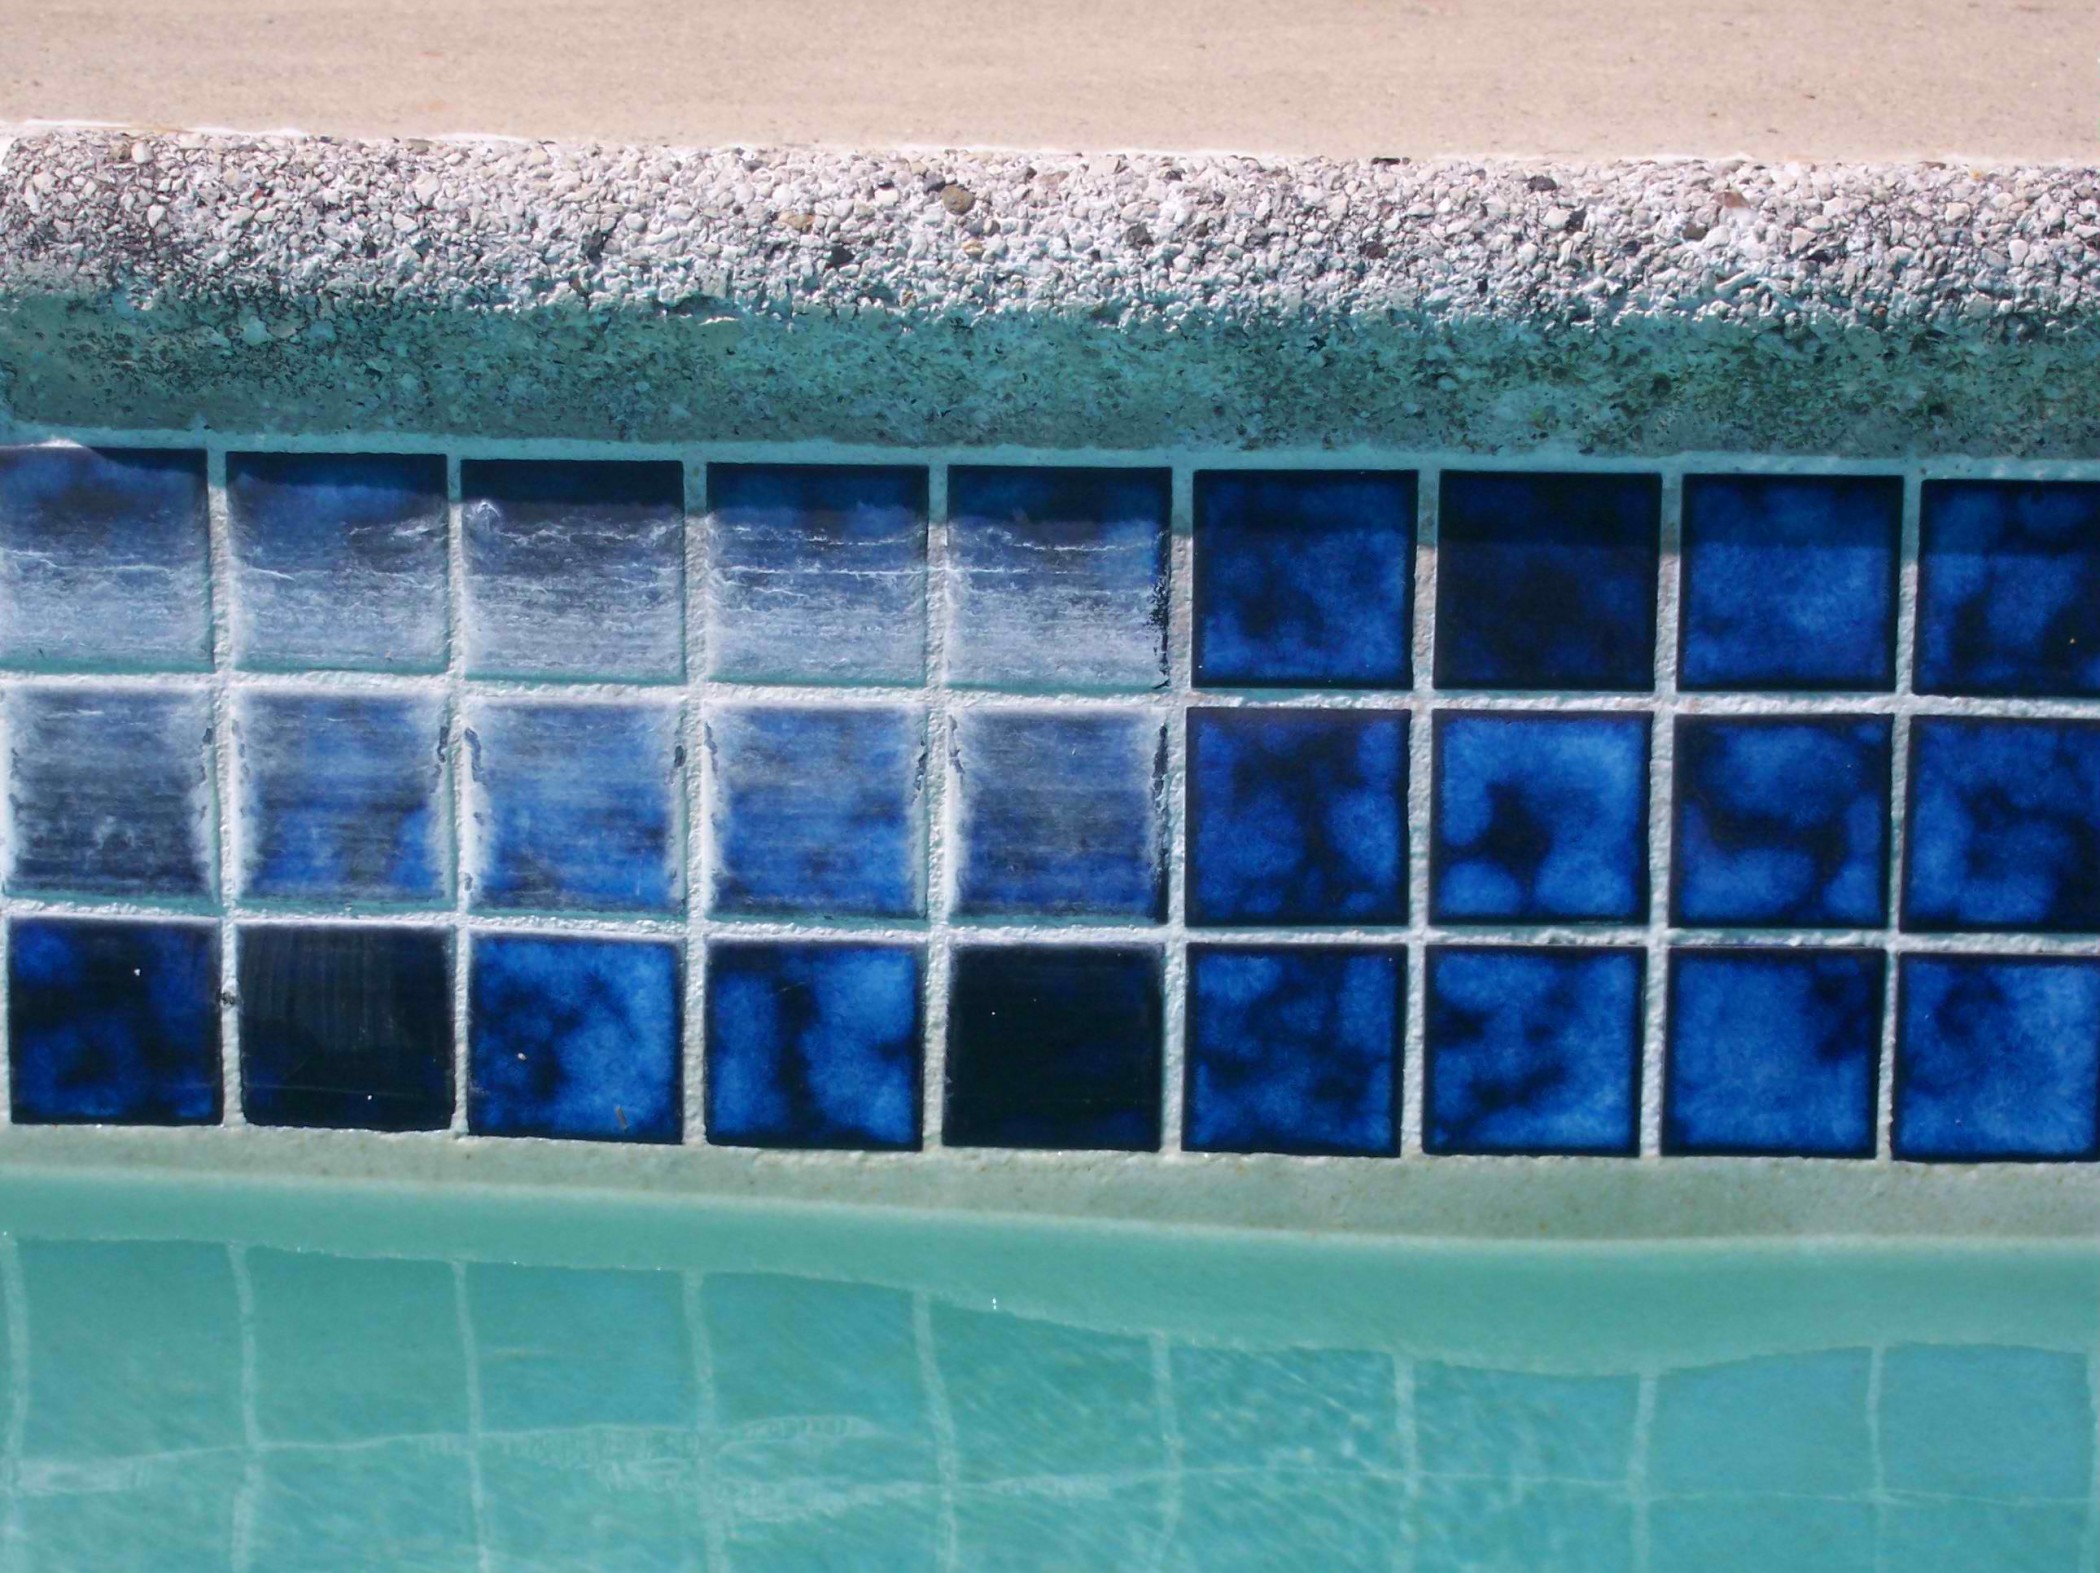 Pool Tile Cleaning Calcium Removal, How Do You Clean Glass Pool Tiles